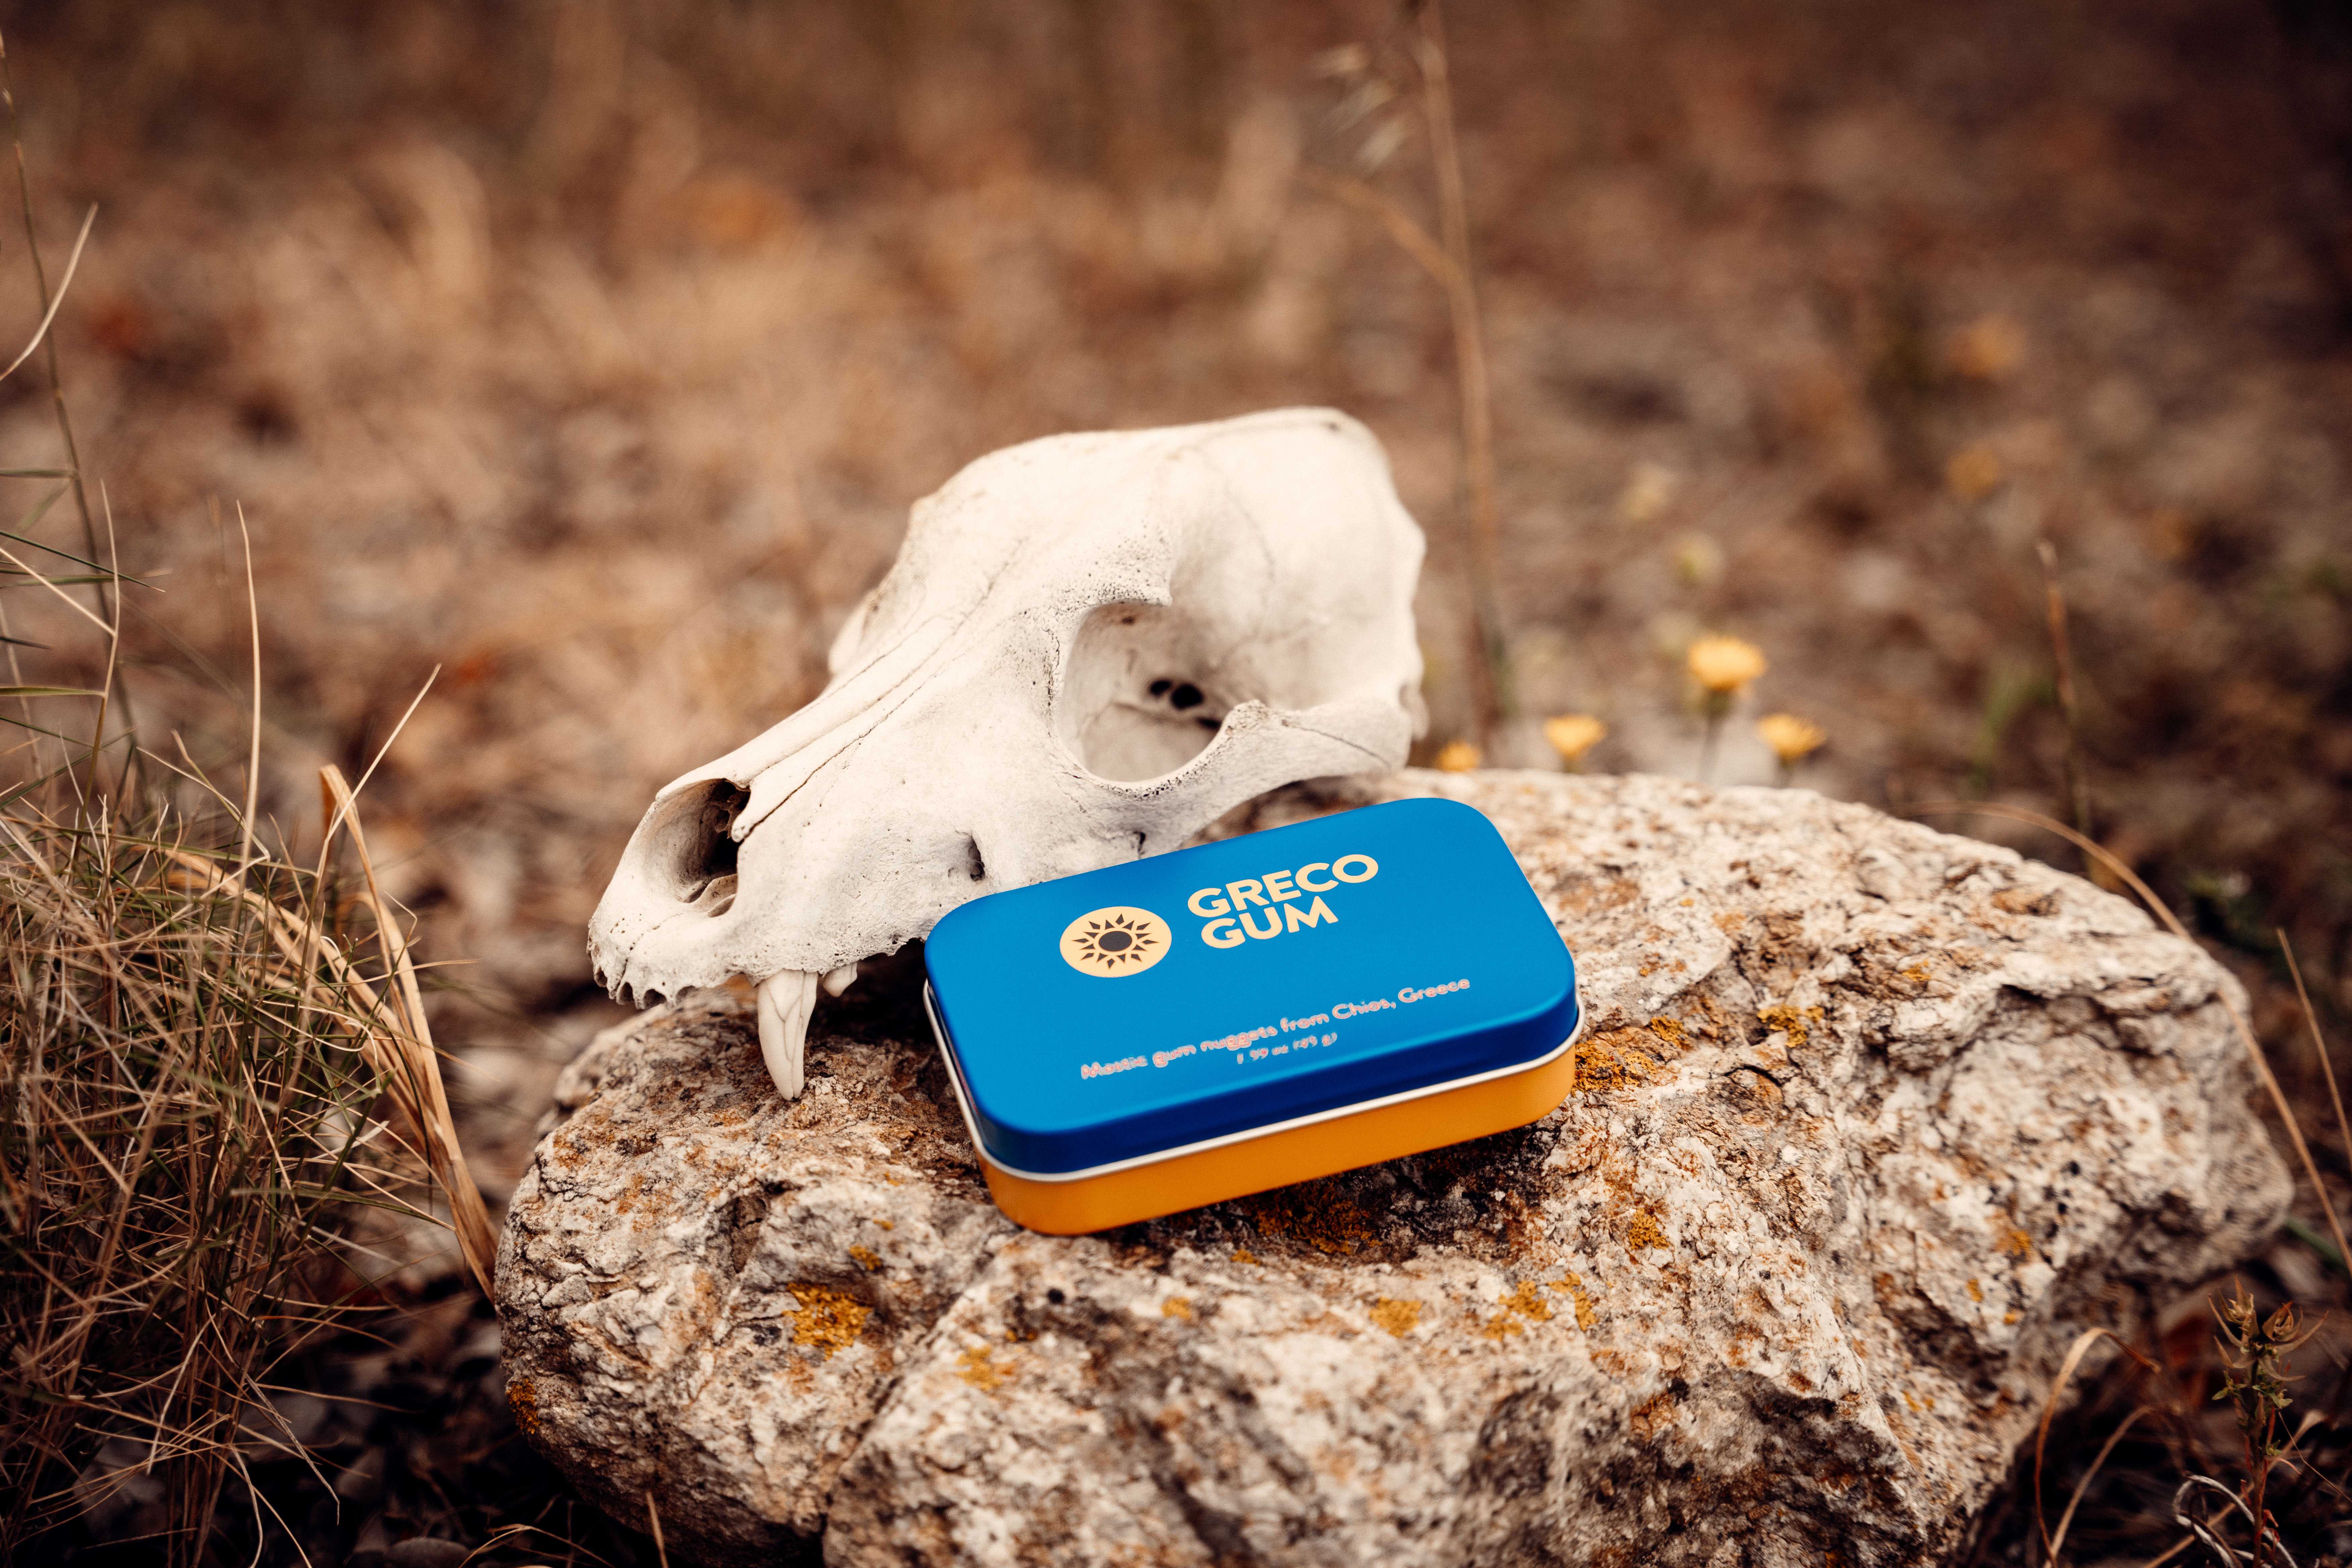 Tin of Greco Gum mastic nuggets placed on a rock next to the skull of an animal